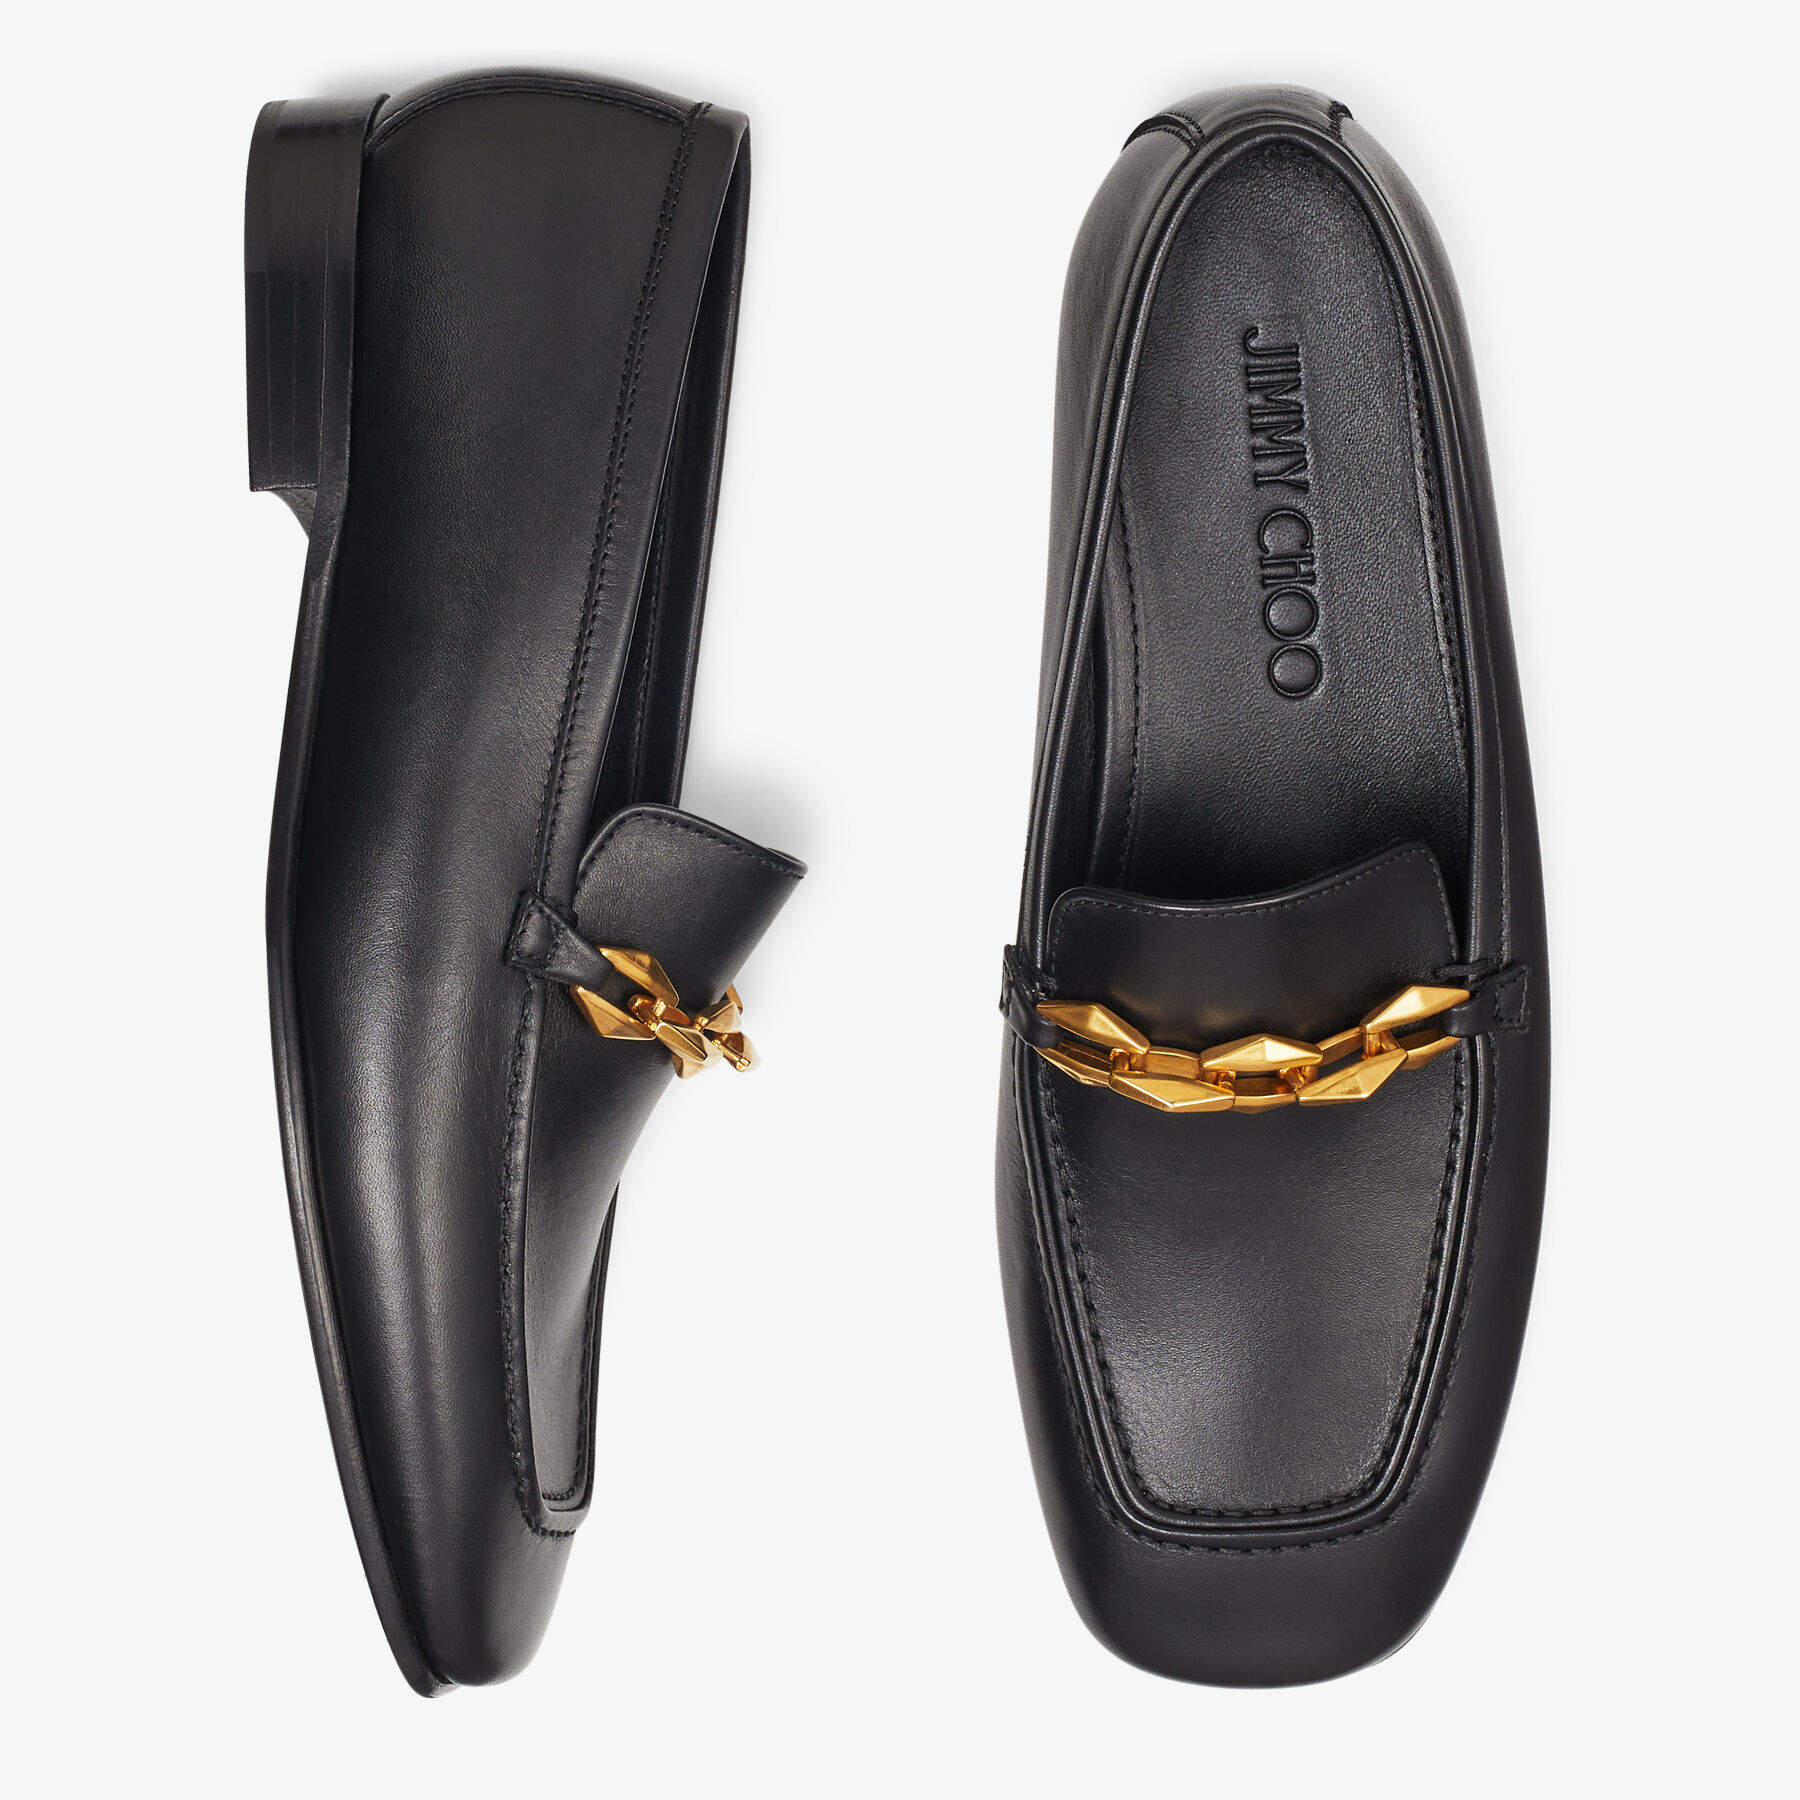 DIAMOND TILDA LOAFER | Black Calf Leather Loafers with Chain 